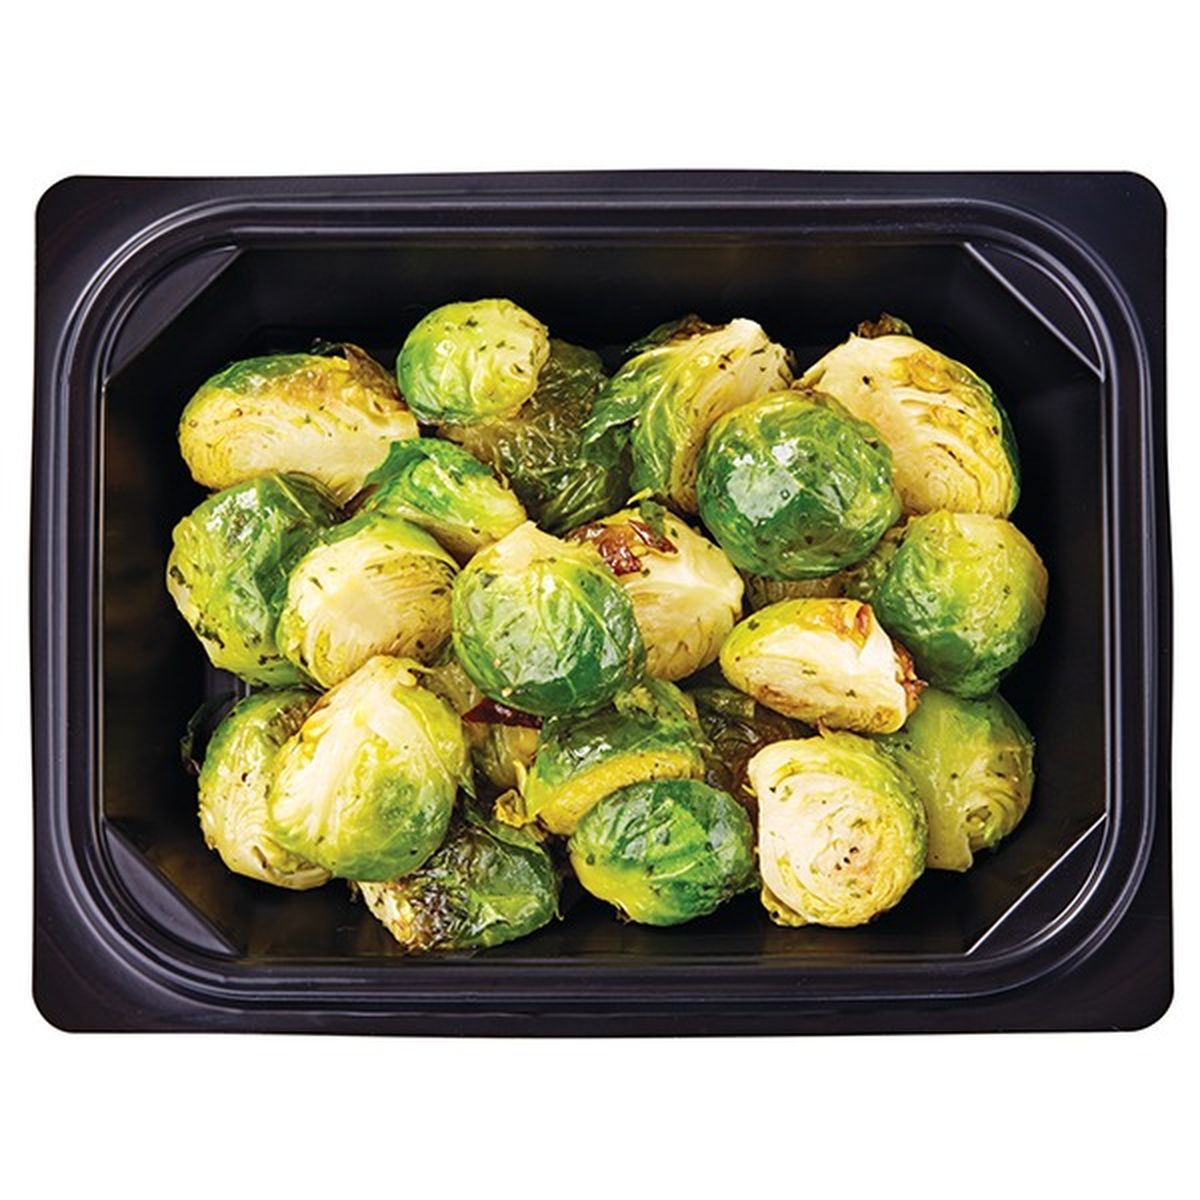 Calories in Wegmans Roasted Brussels Sprouts Veggie Bowl